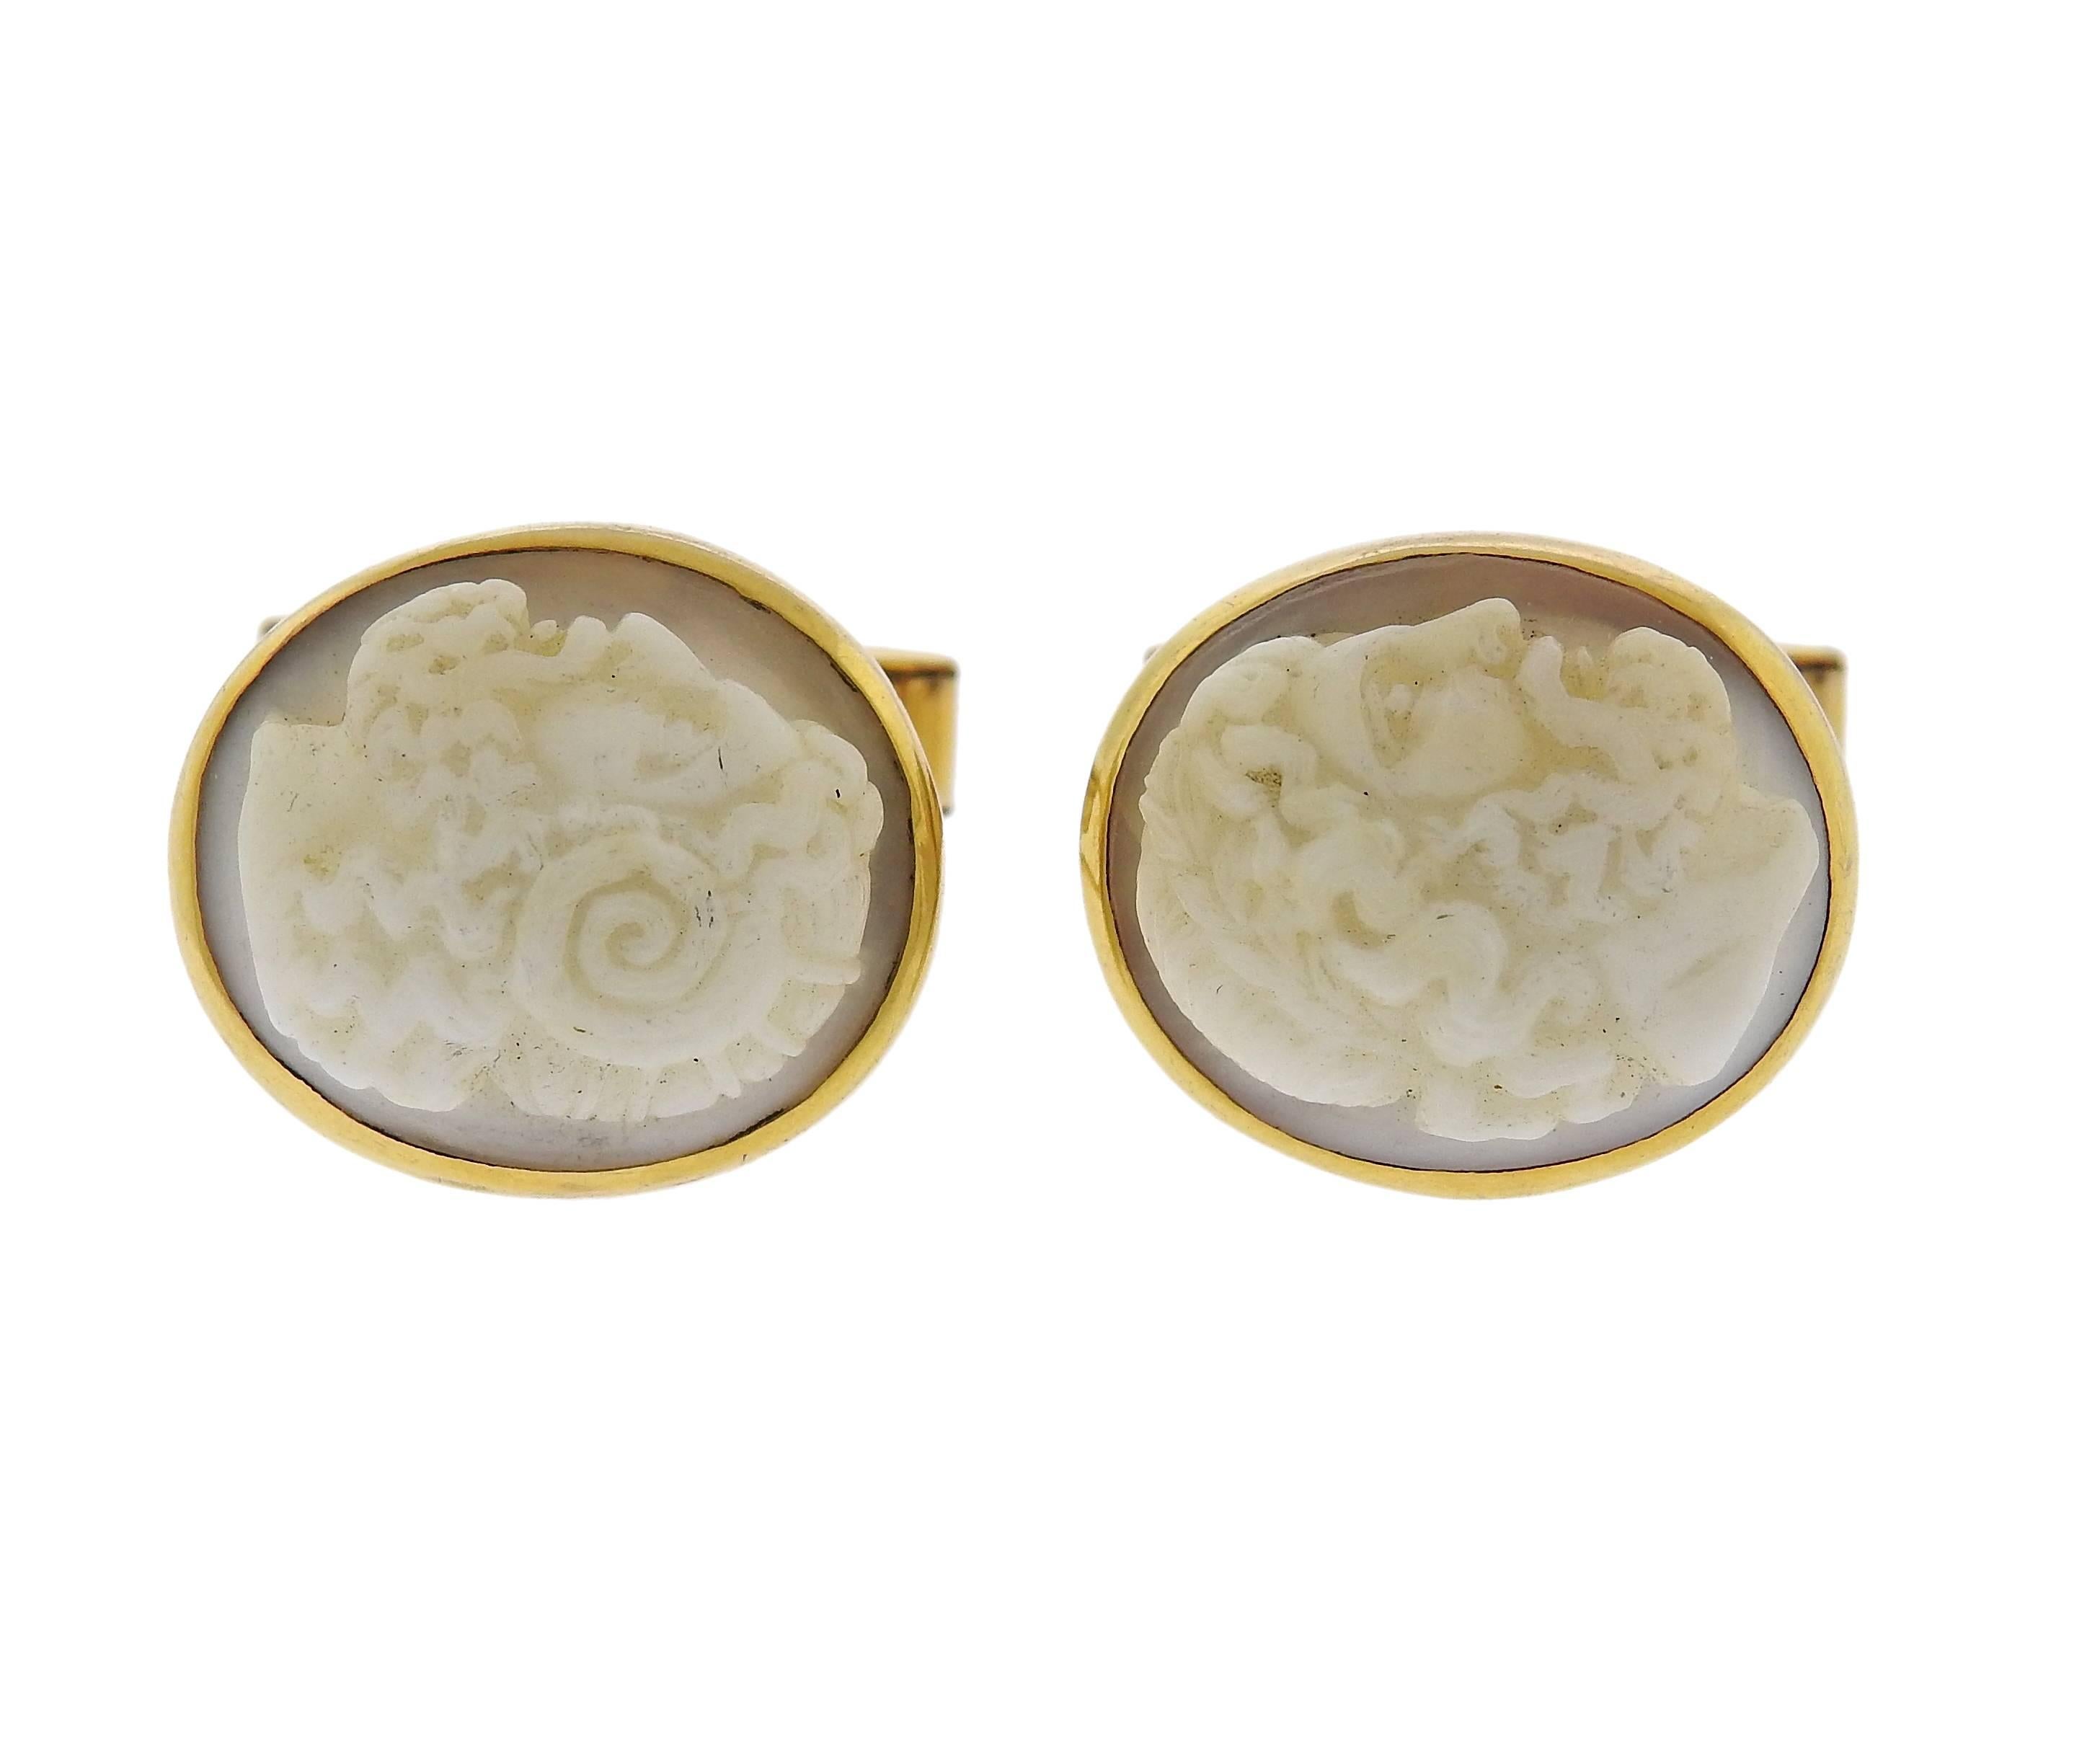 Pair of antique 14k gold cufflinks, set with hardstone cameos. Cufflink top - 20mm x 17mm, weigh 13.9 grams